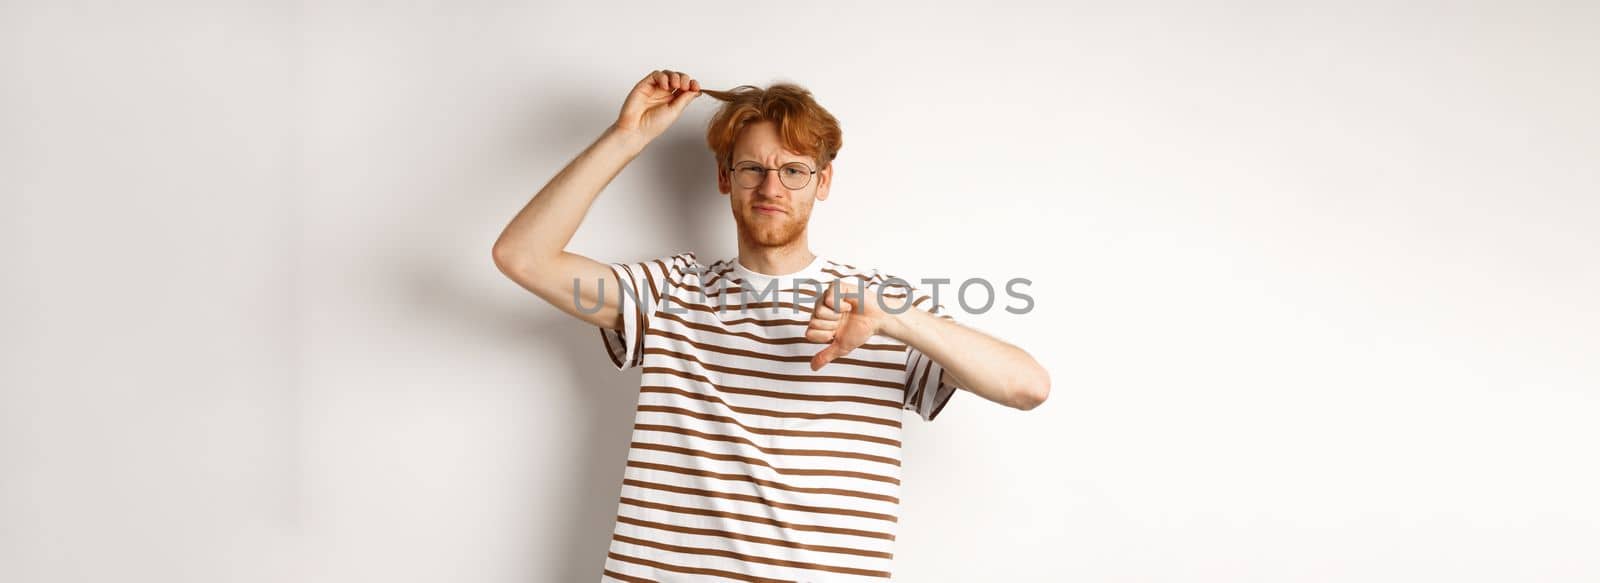 Young redhead man showing his messy haircut and thumbs-down, need hairdresser, standing over white background.